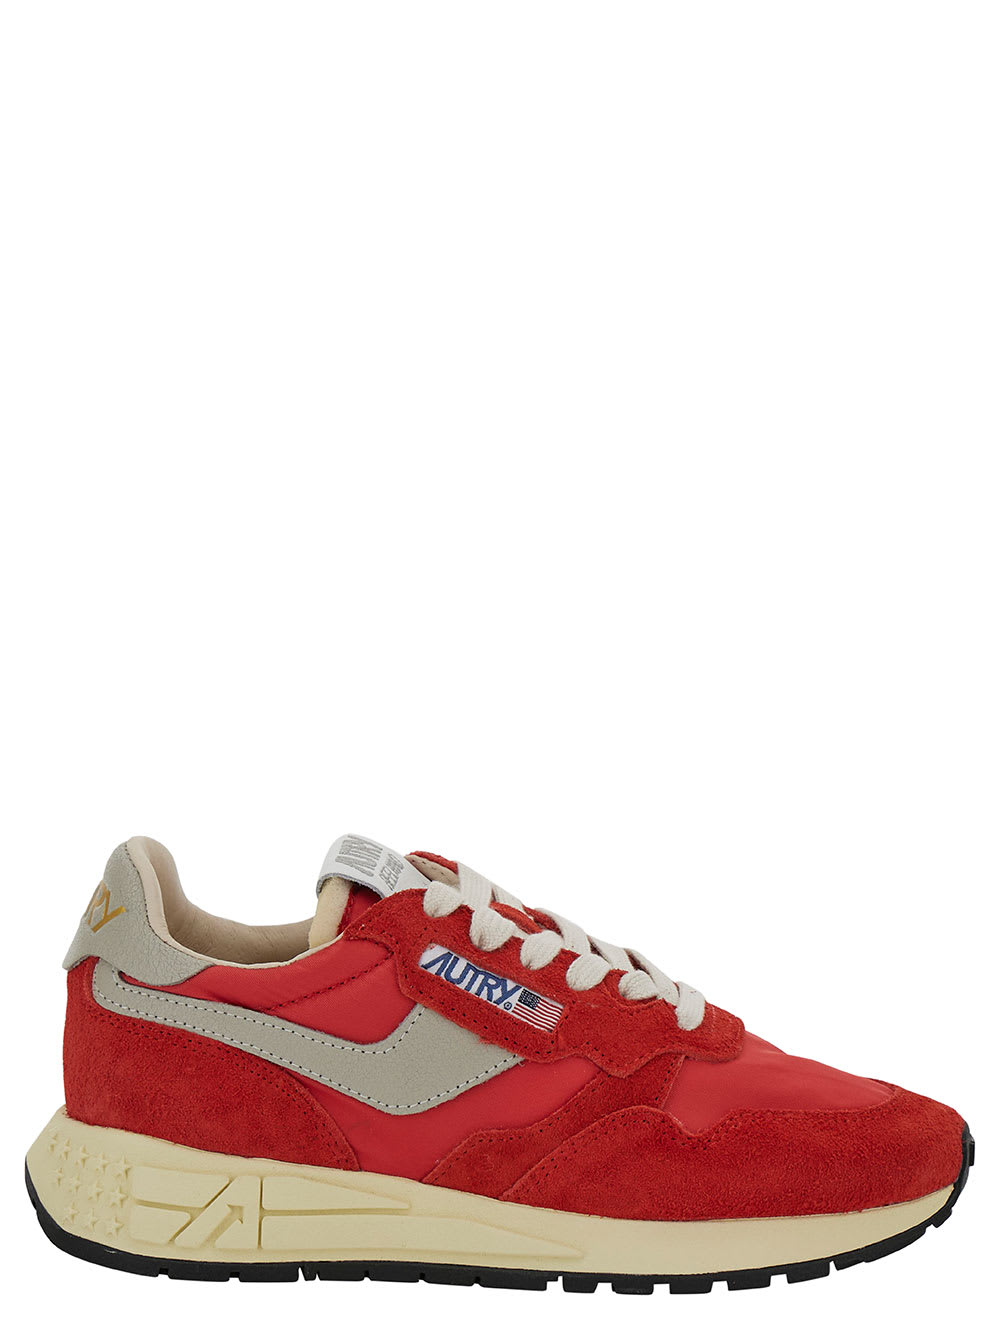 AUTRY REELWIND RED LOW TOP SNEAKERS WITH LOGO PATCH IN LEATHER AND SUEDE WOMAN